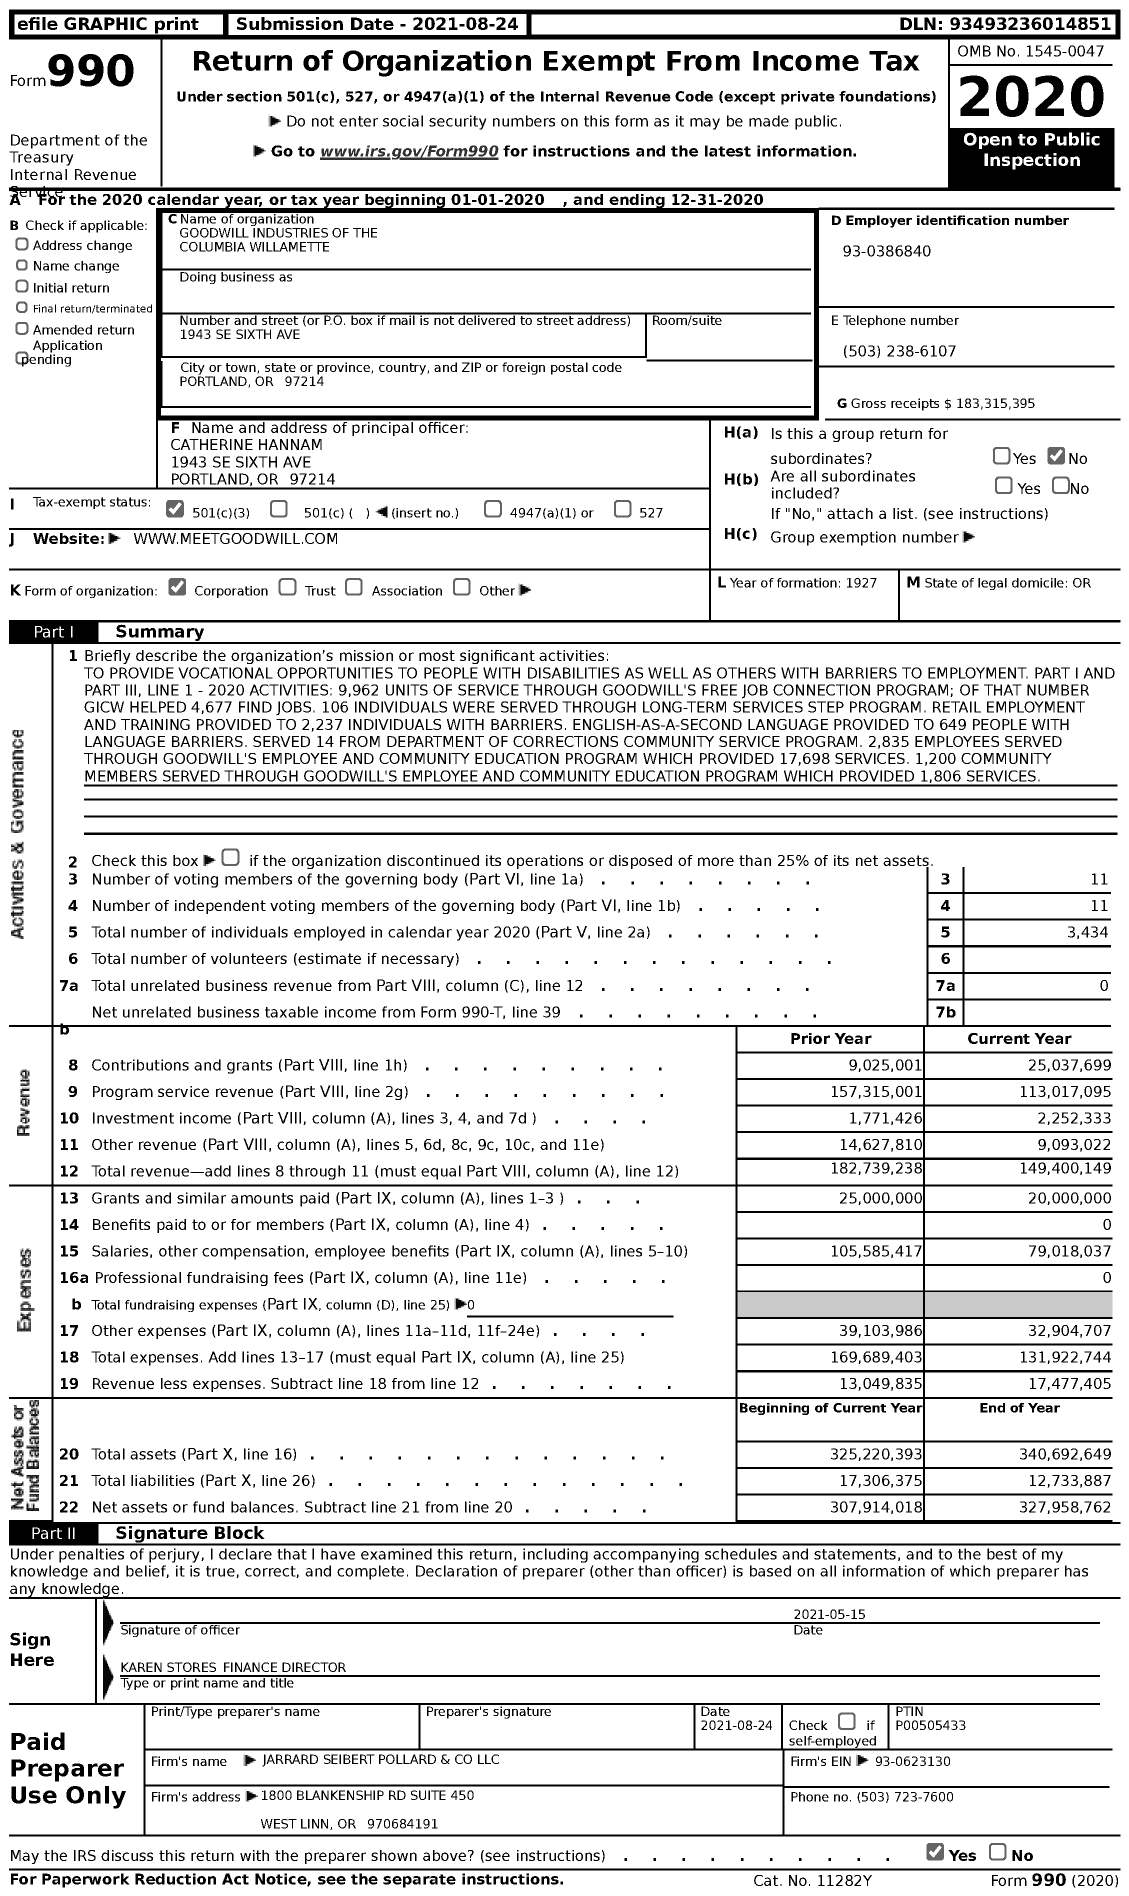 Image of first page of 2020 Form 990 for Goodwill Industries of the Columbia Willamette (GICW)